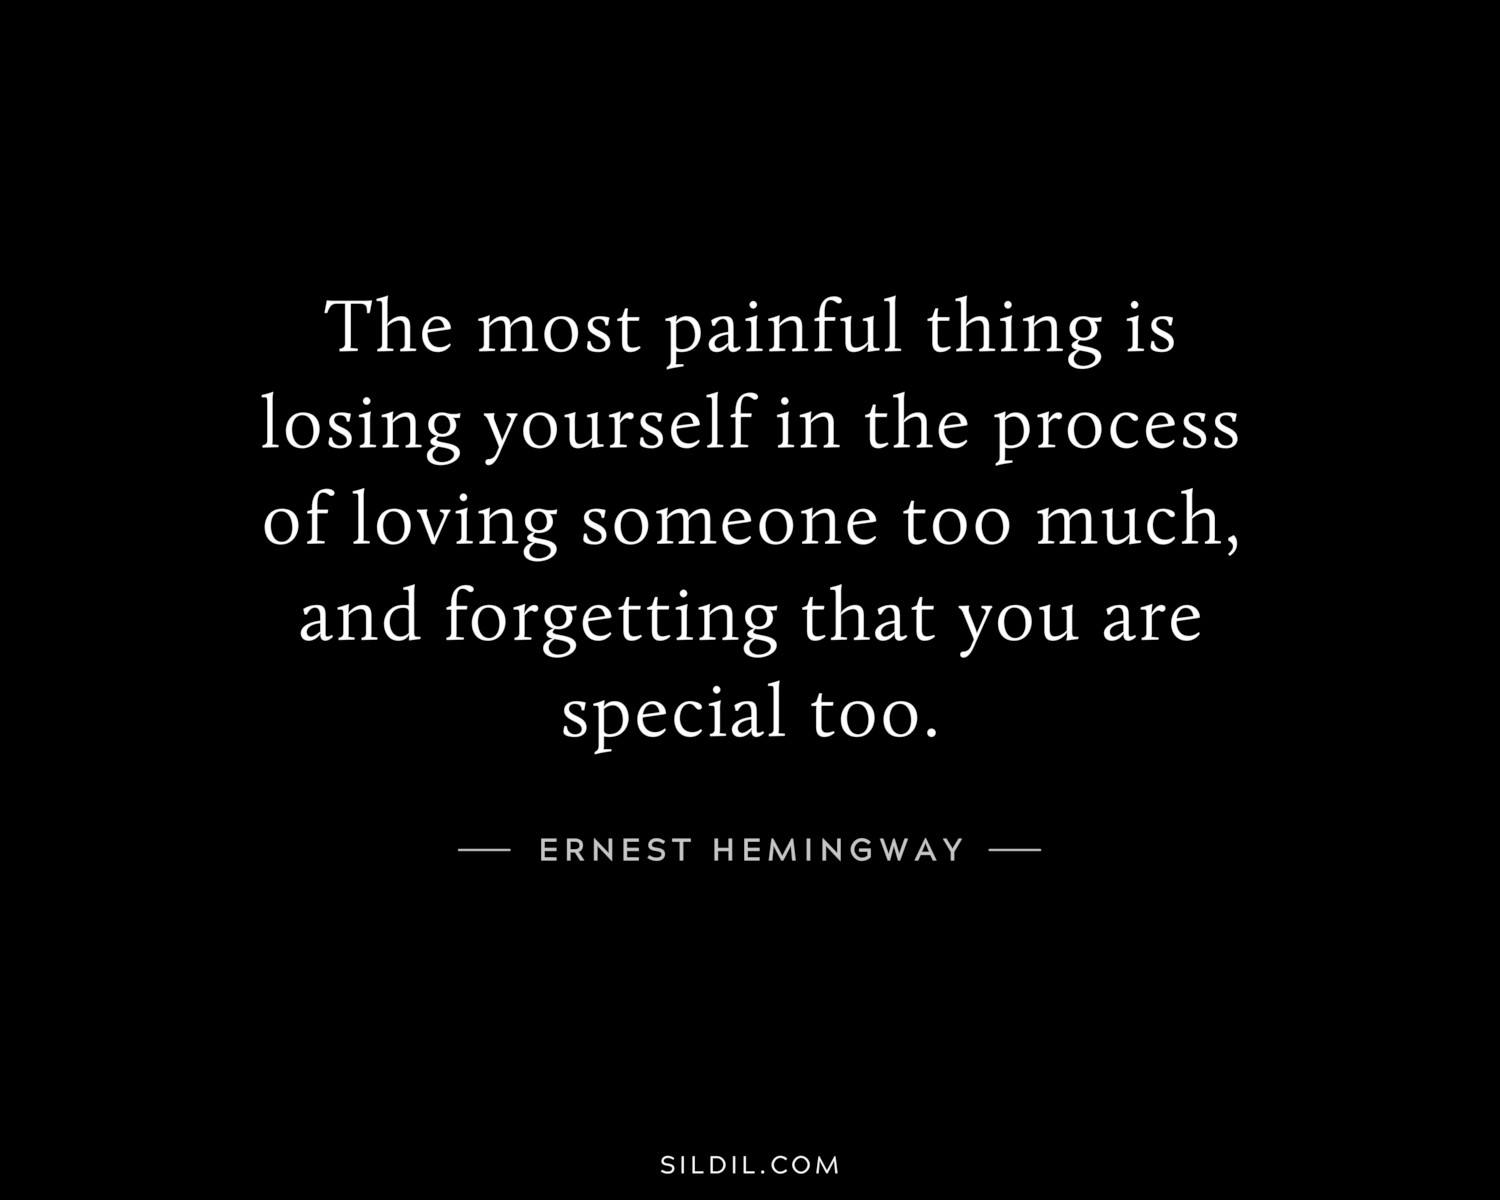 The most painful thing is losing yourself in the process of loving someone too much, and forgetting that you are special too.